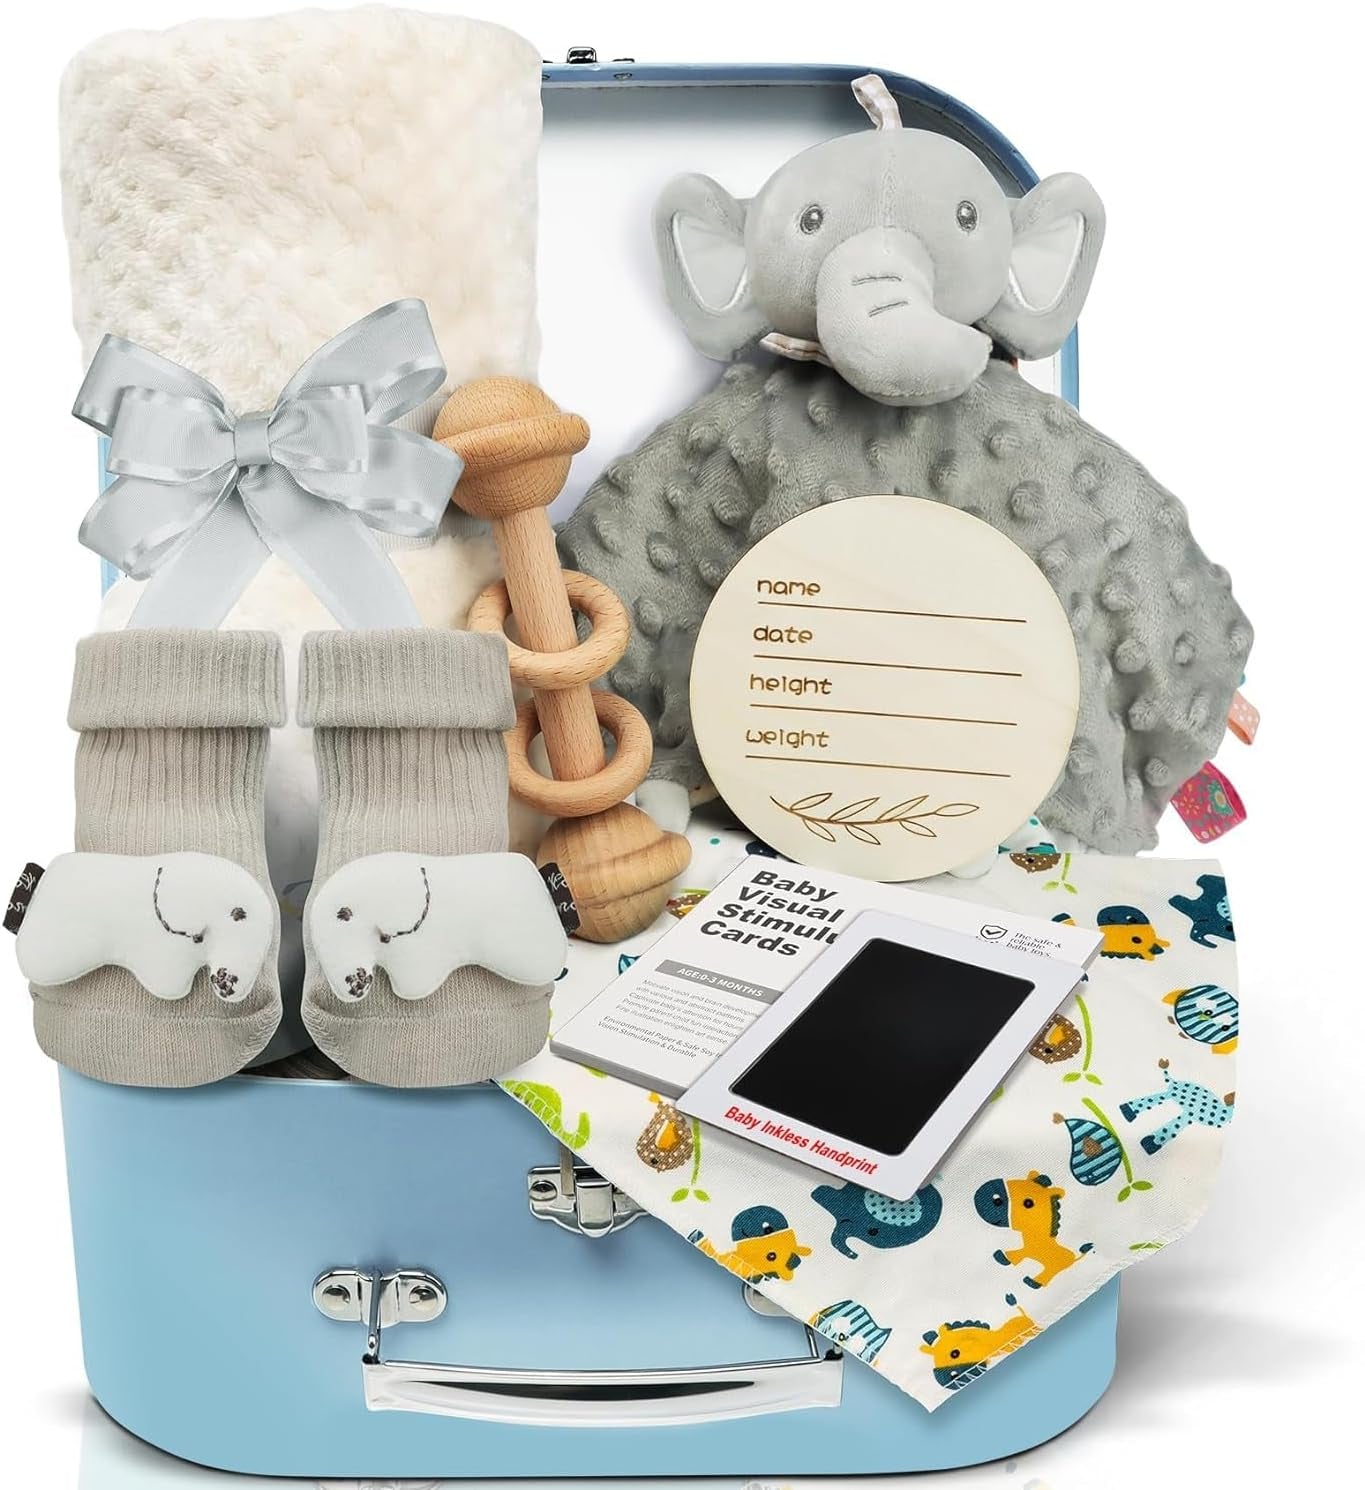 Newborn Baby Shower Gifts Set: 9PCS Boy Gifts Hamper Including Baby Blankets&Baby Bibs&Baby Socks and More - Unisex New Born Box Personalised Boy Presents